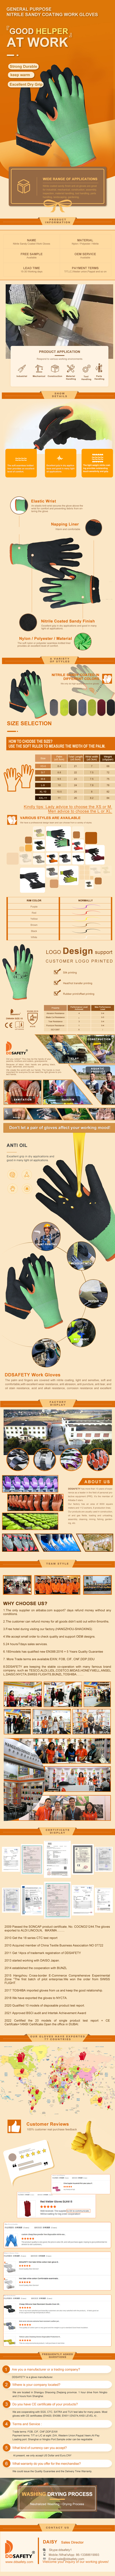 Nitrile Sandy Coated Thermal Gloves, Reinforced thumb crotch  - DNN494 Nitrile Sandy Coated Thermal Gloves, Reinforced thumb crotch  - DNN494 Enhanced Grip Mechanic Work Gloves,Work Gloves Recycled polyester shell,Work Gloves,Work Gloves Recycled polyester shell with napping liner